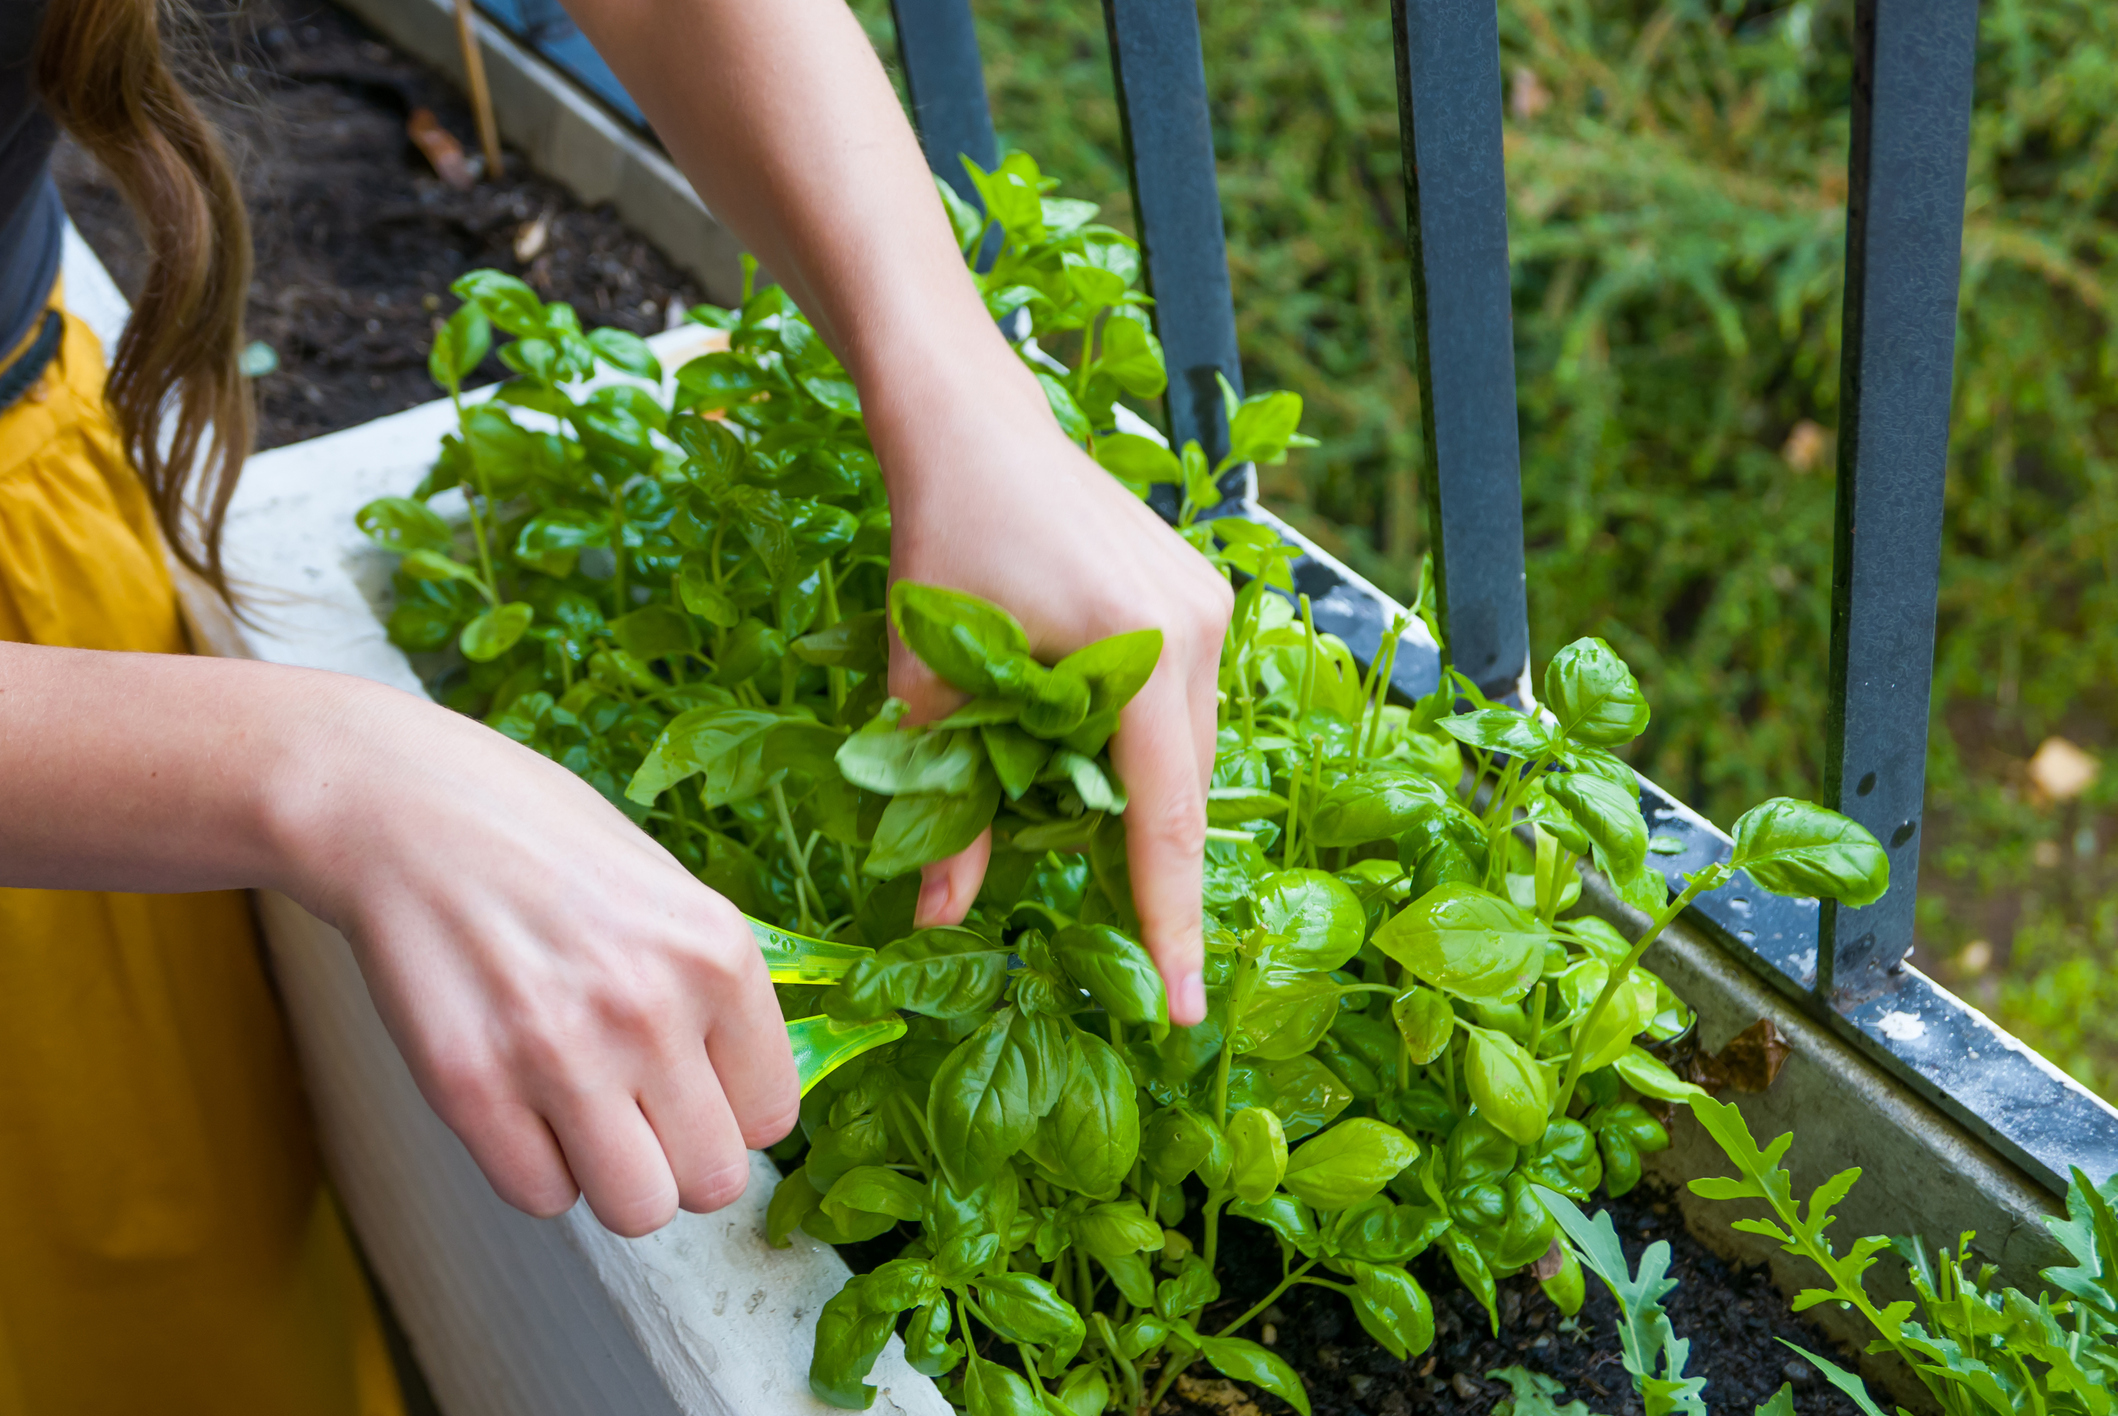 woman cutting basil plants from a container garden on her balcony